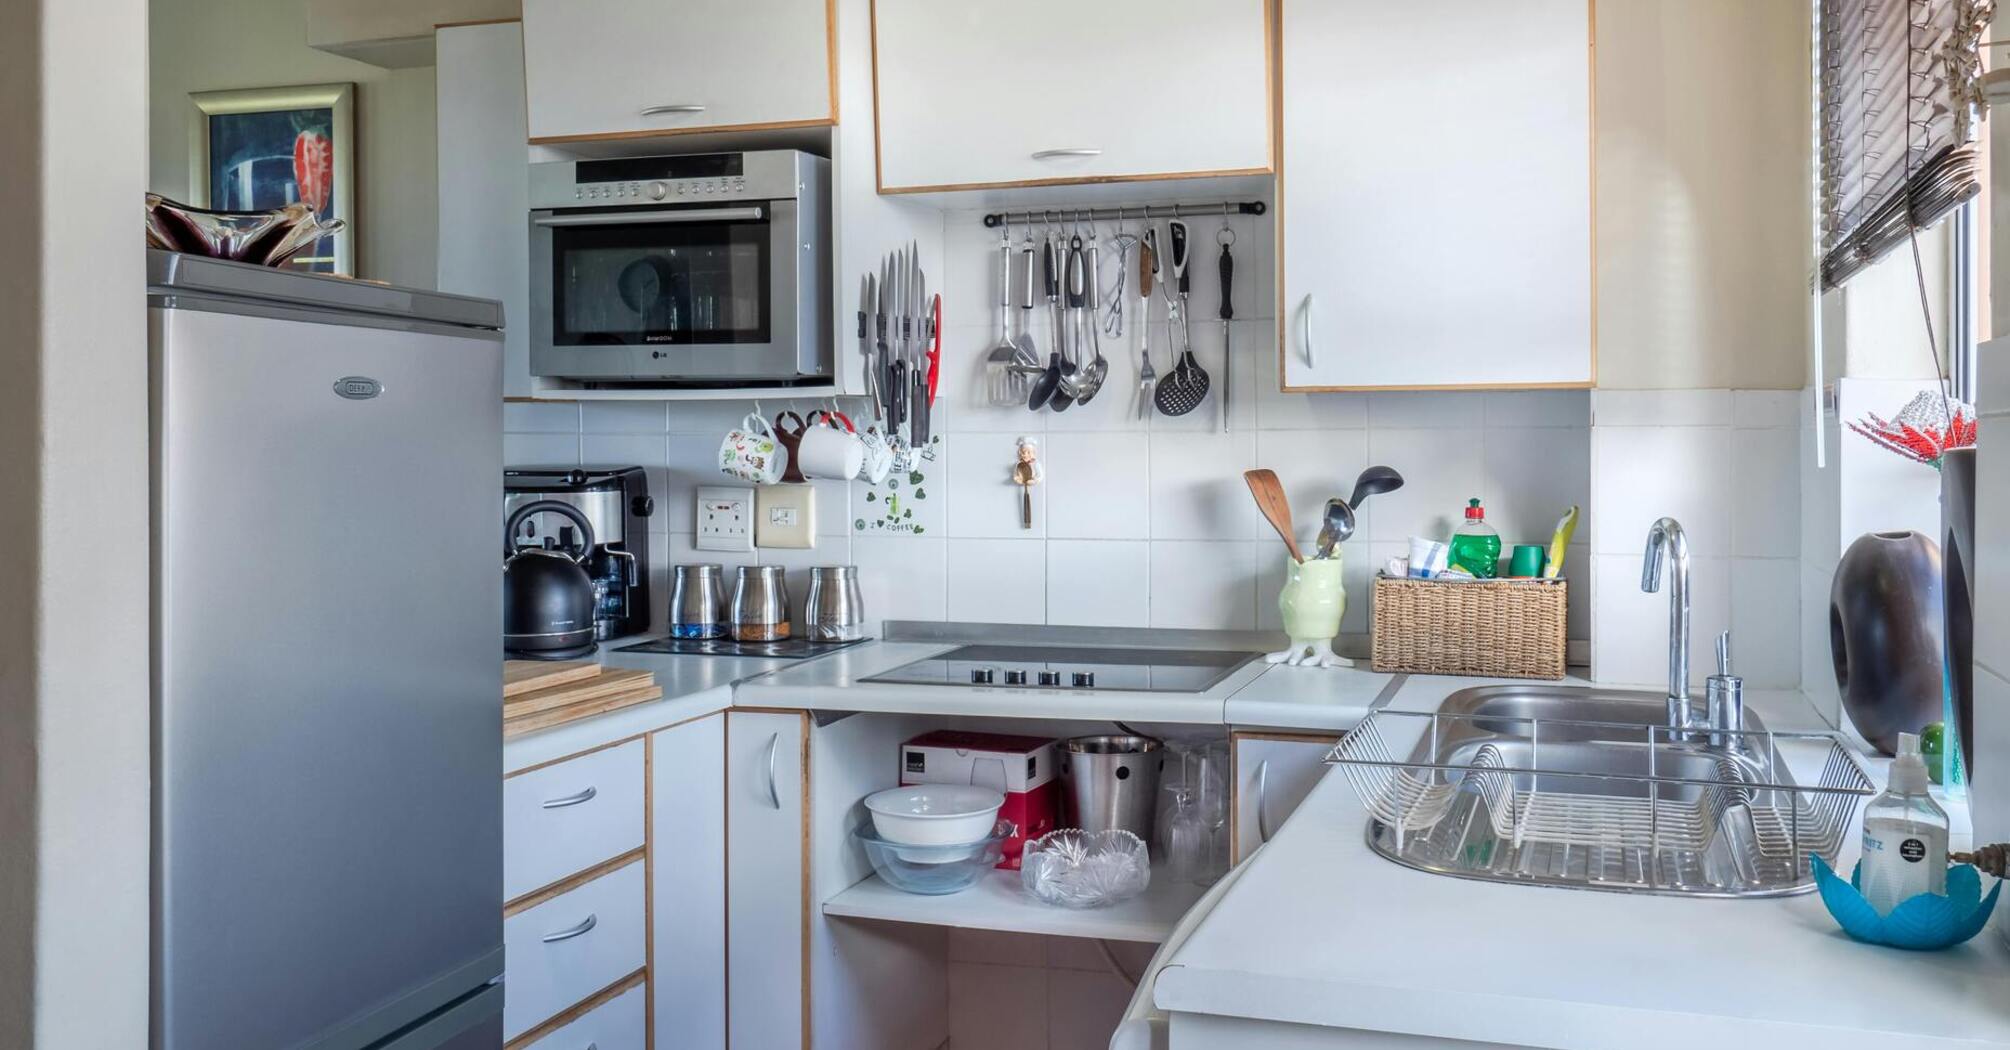 How to equip a small kitchen: 5 tips